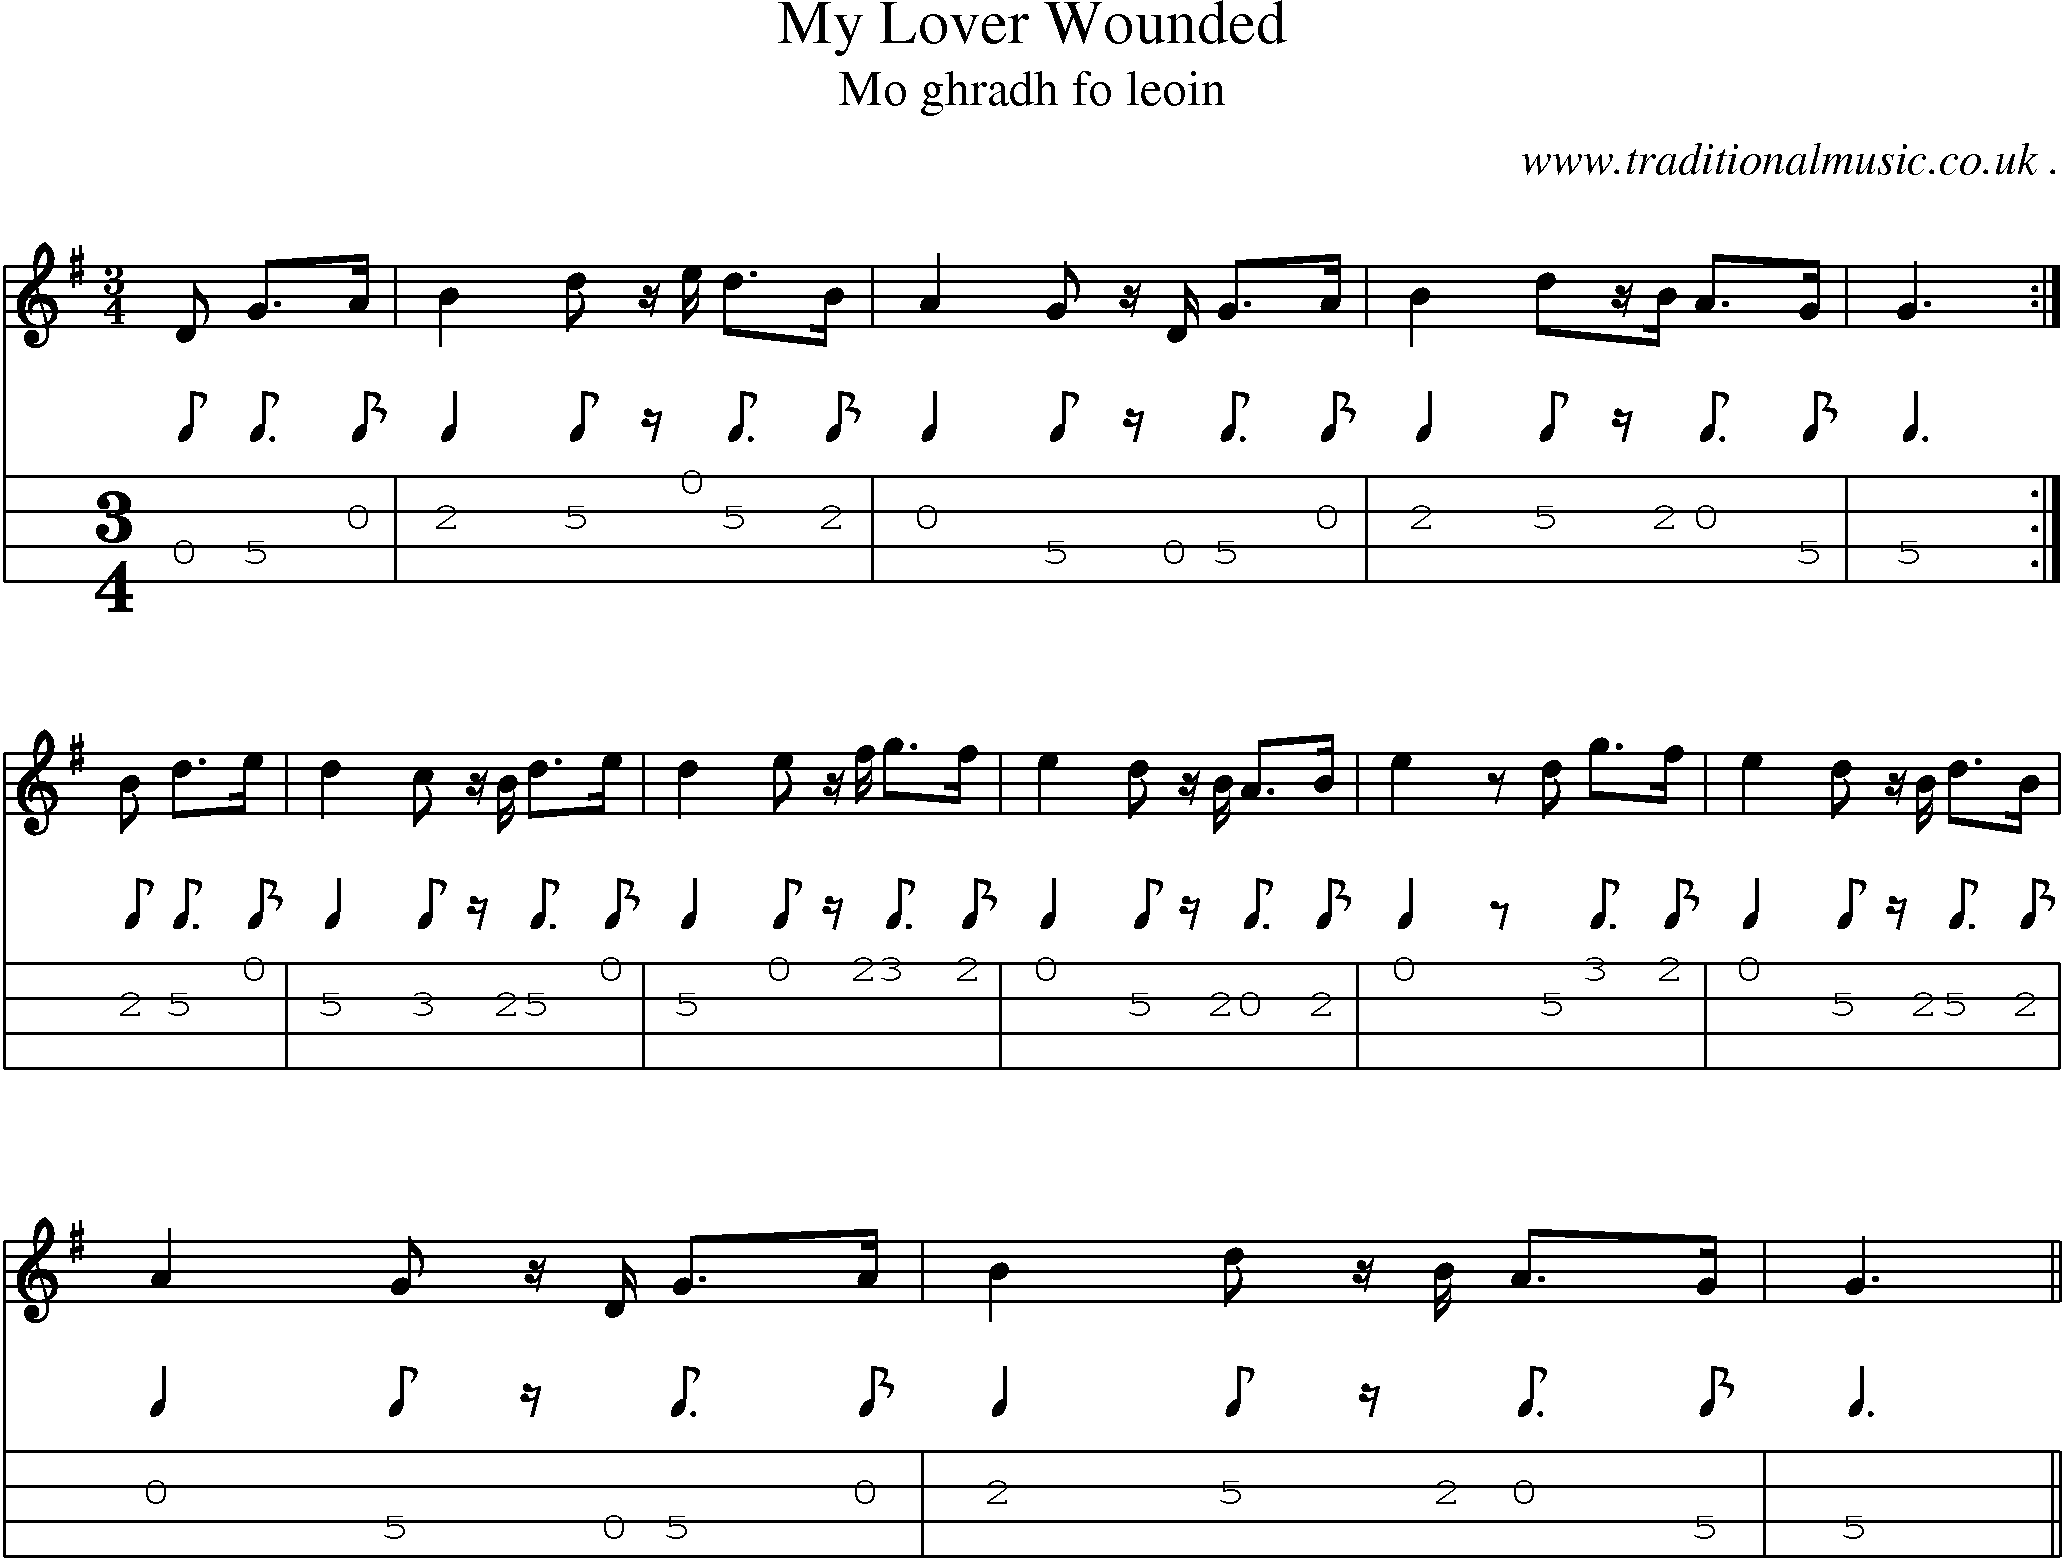 Sheet-music  score, Chords and Mandolin Tabs for My Lover Wounded